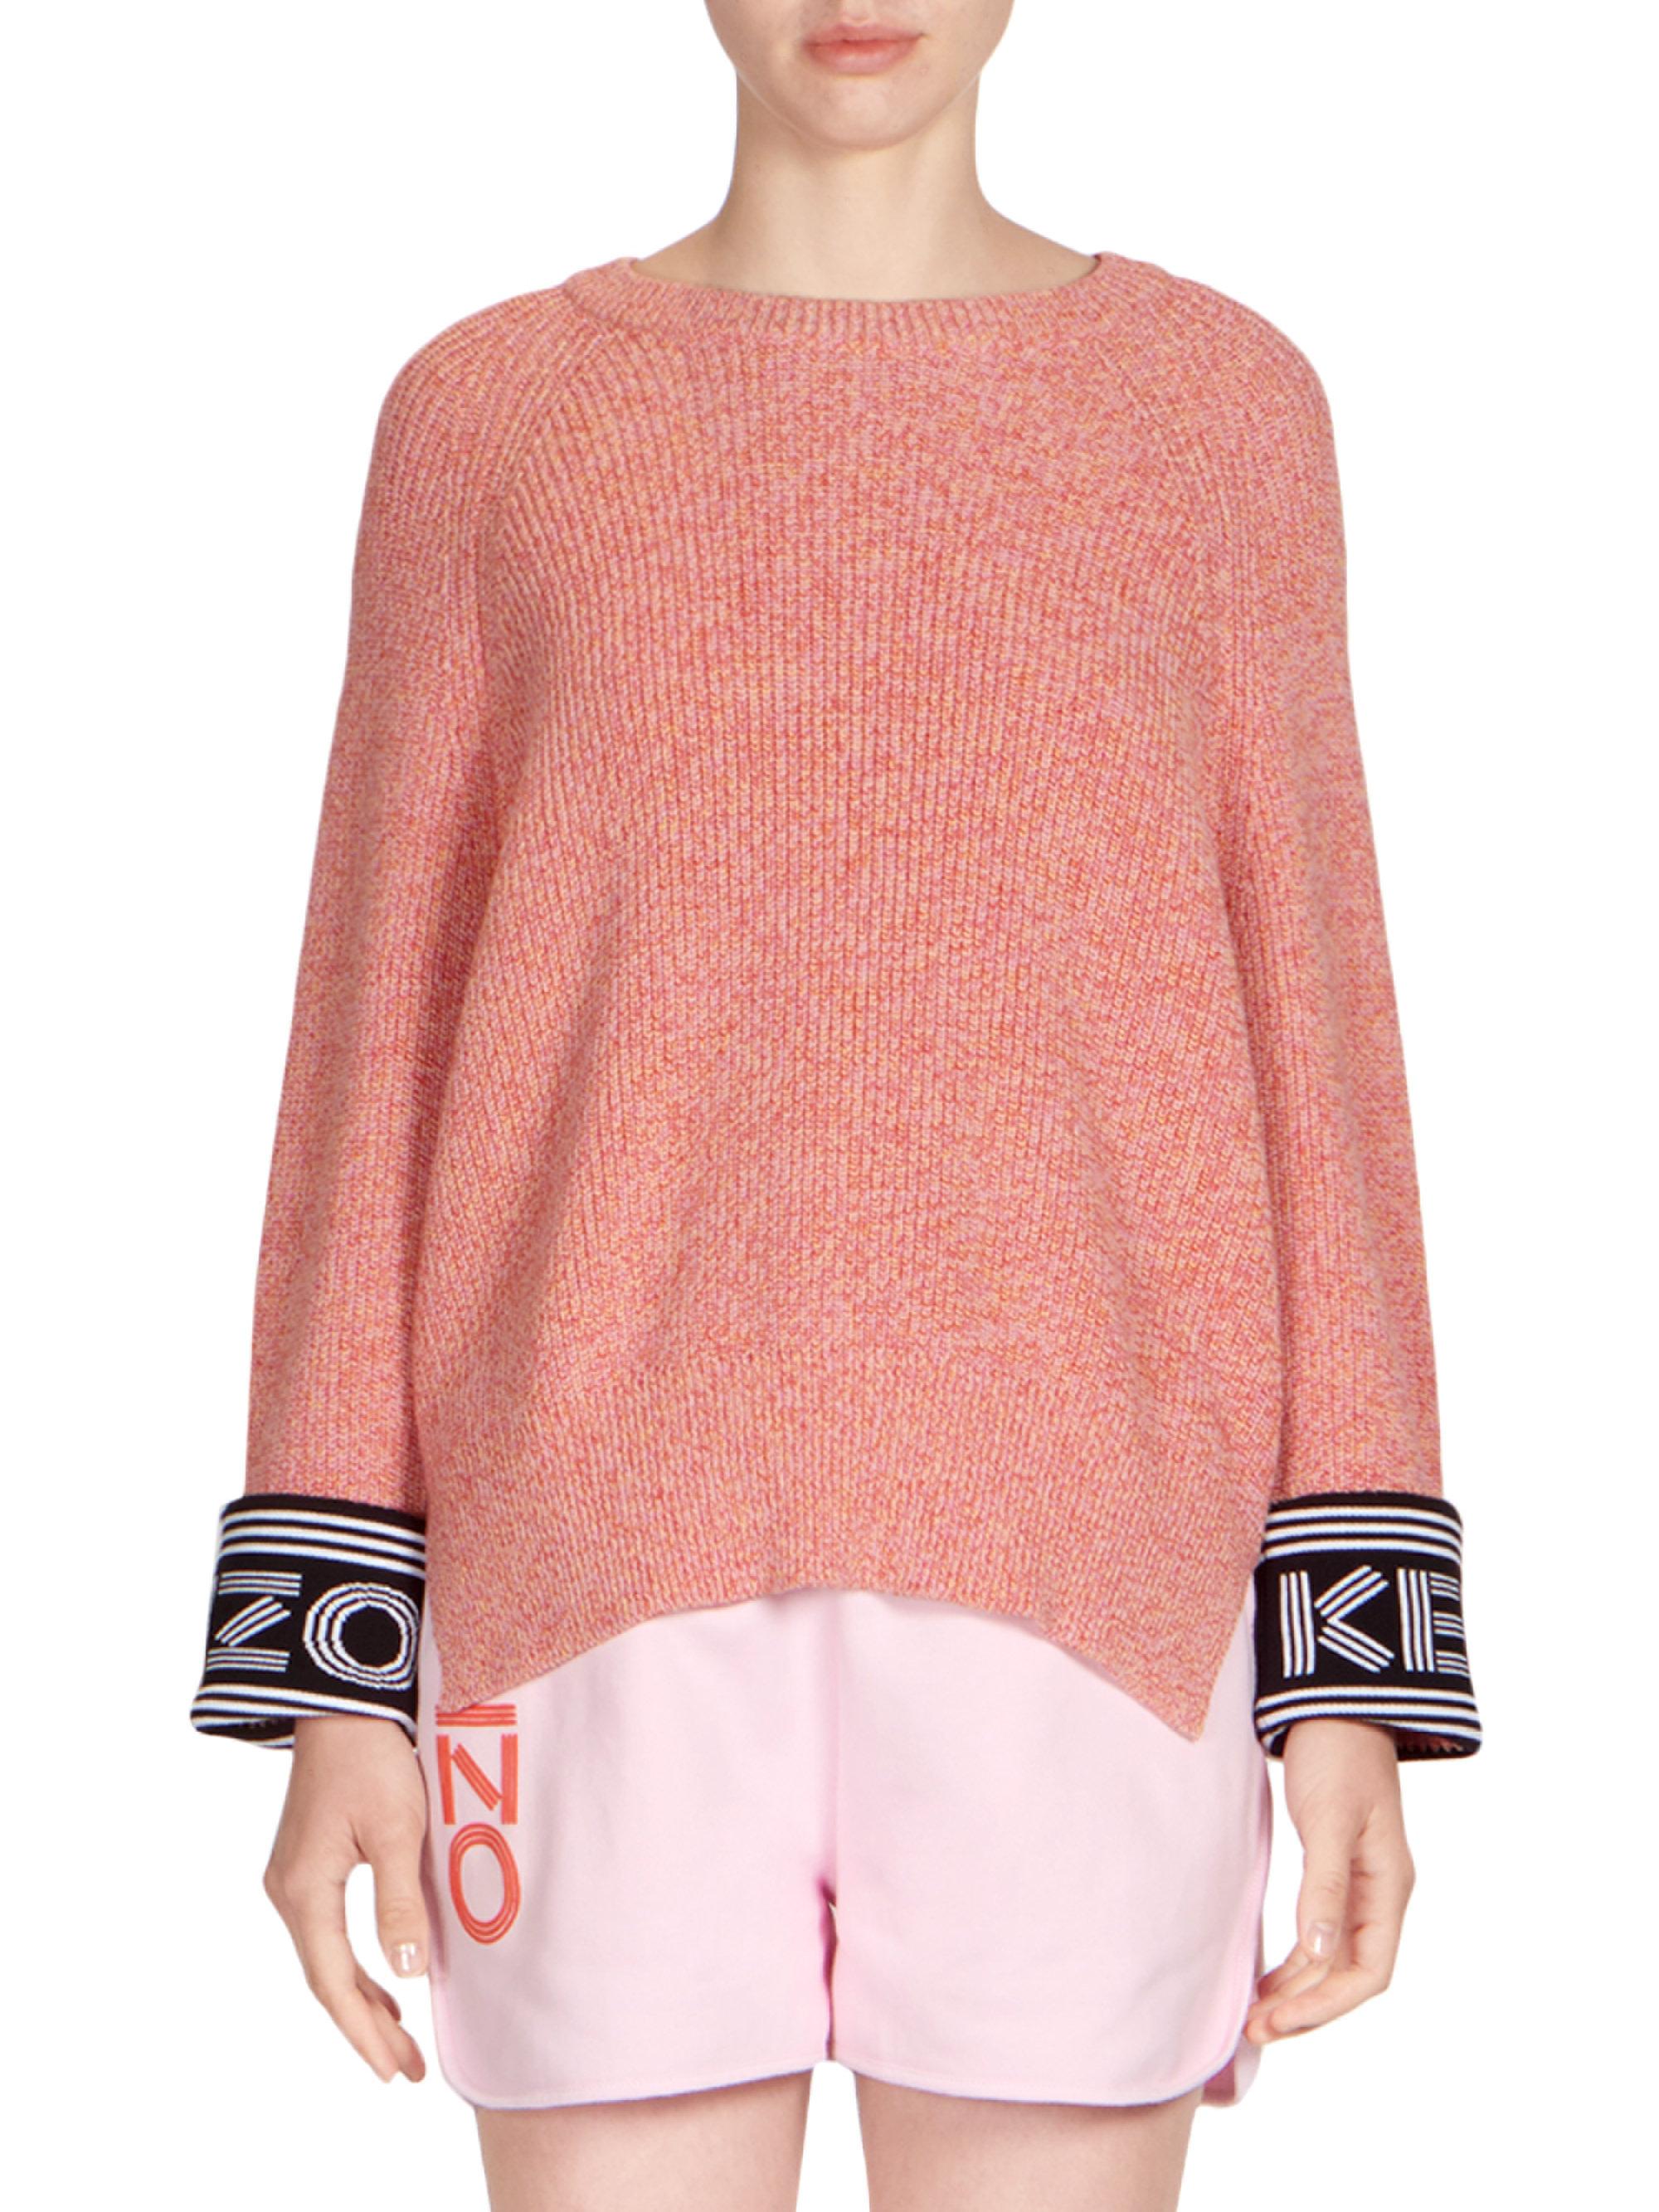 KENZO Cotton Logo Cuff Knit Sweater in Soft Pink (Pink) - Lyst